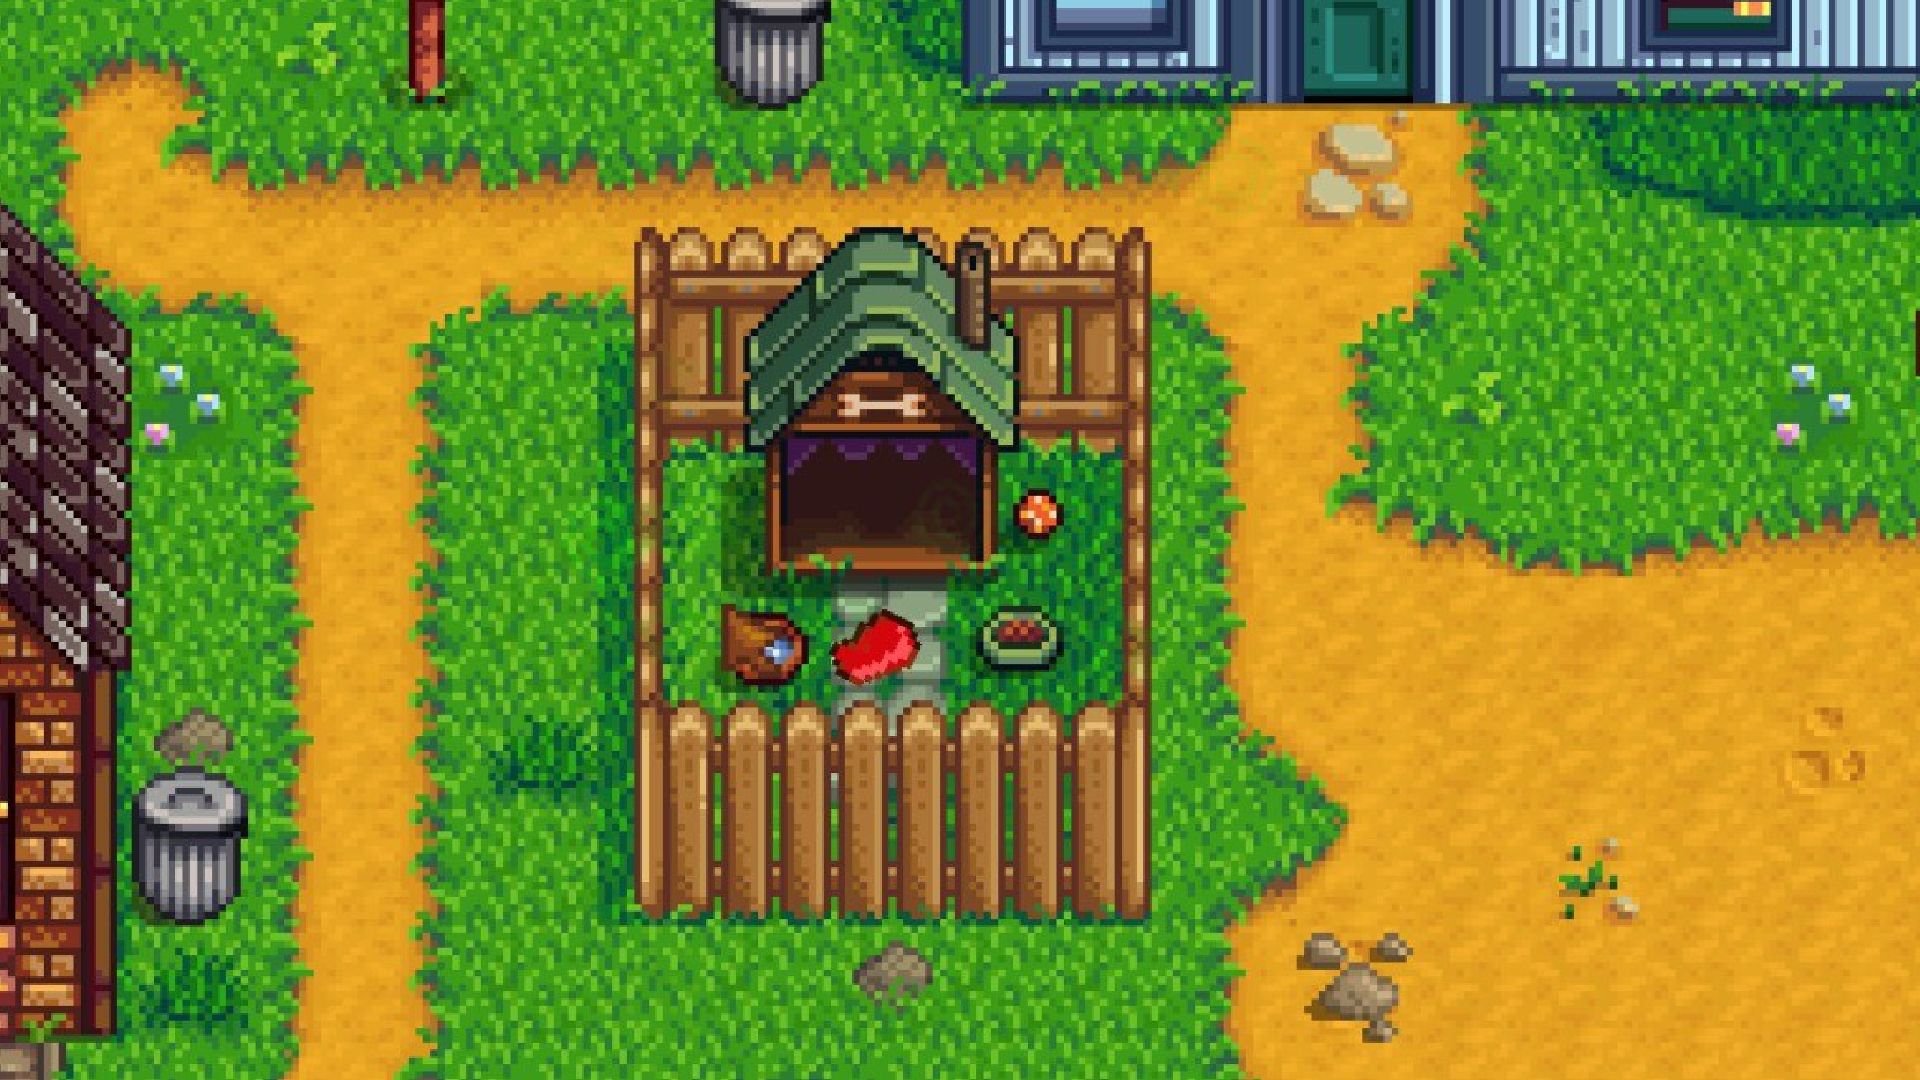 stardew valley dog house after cleaned up by trash bear